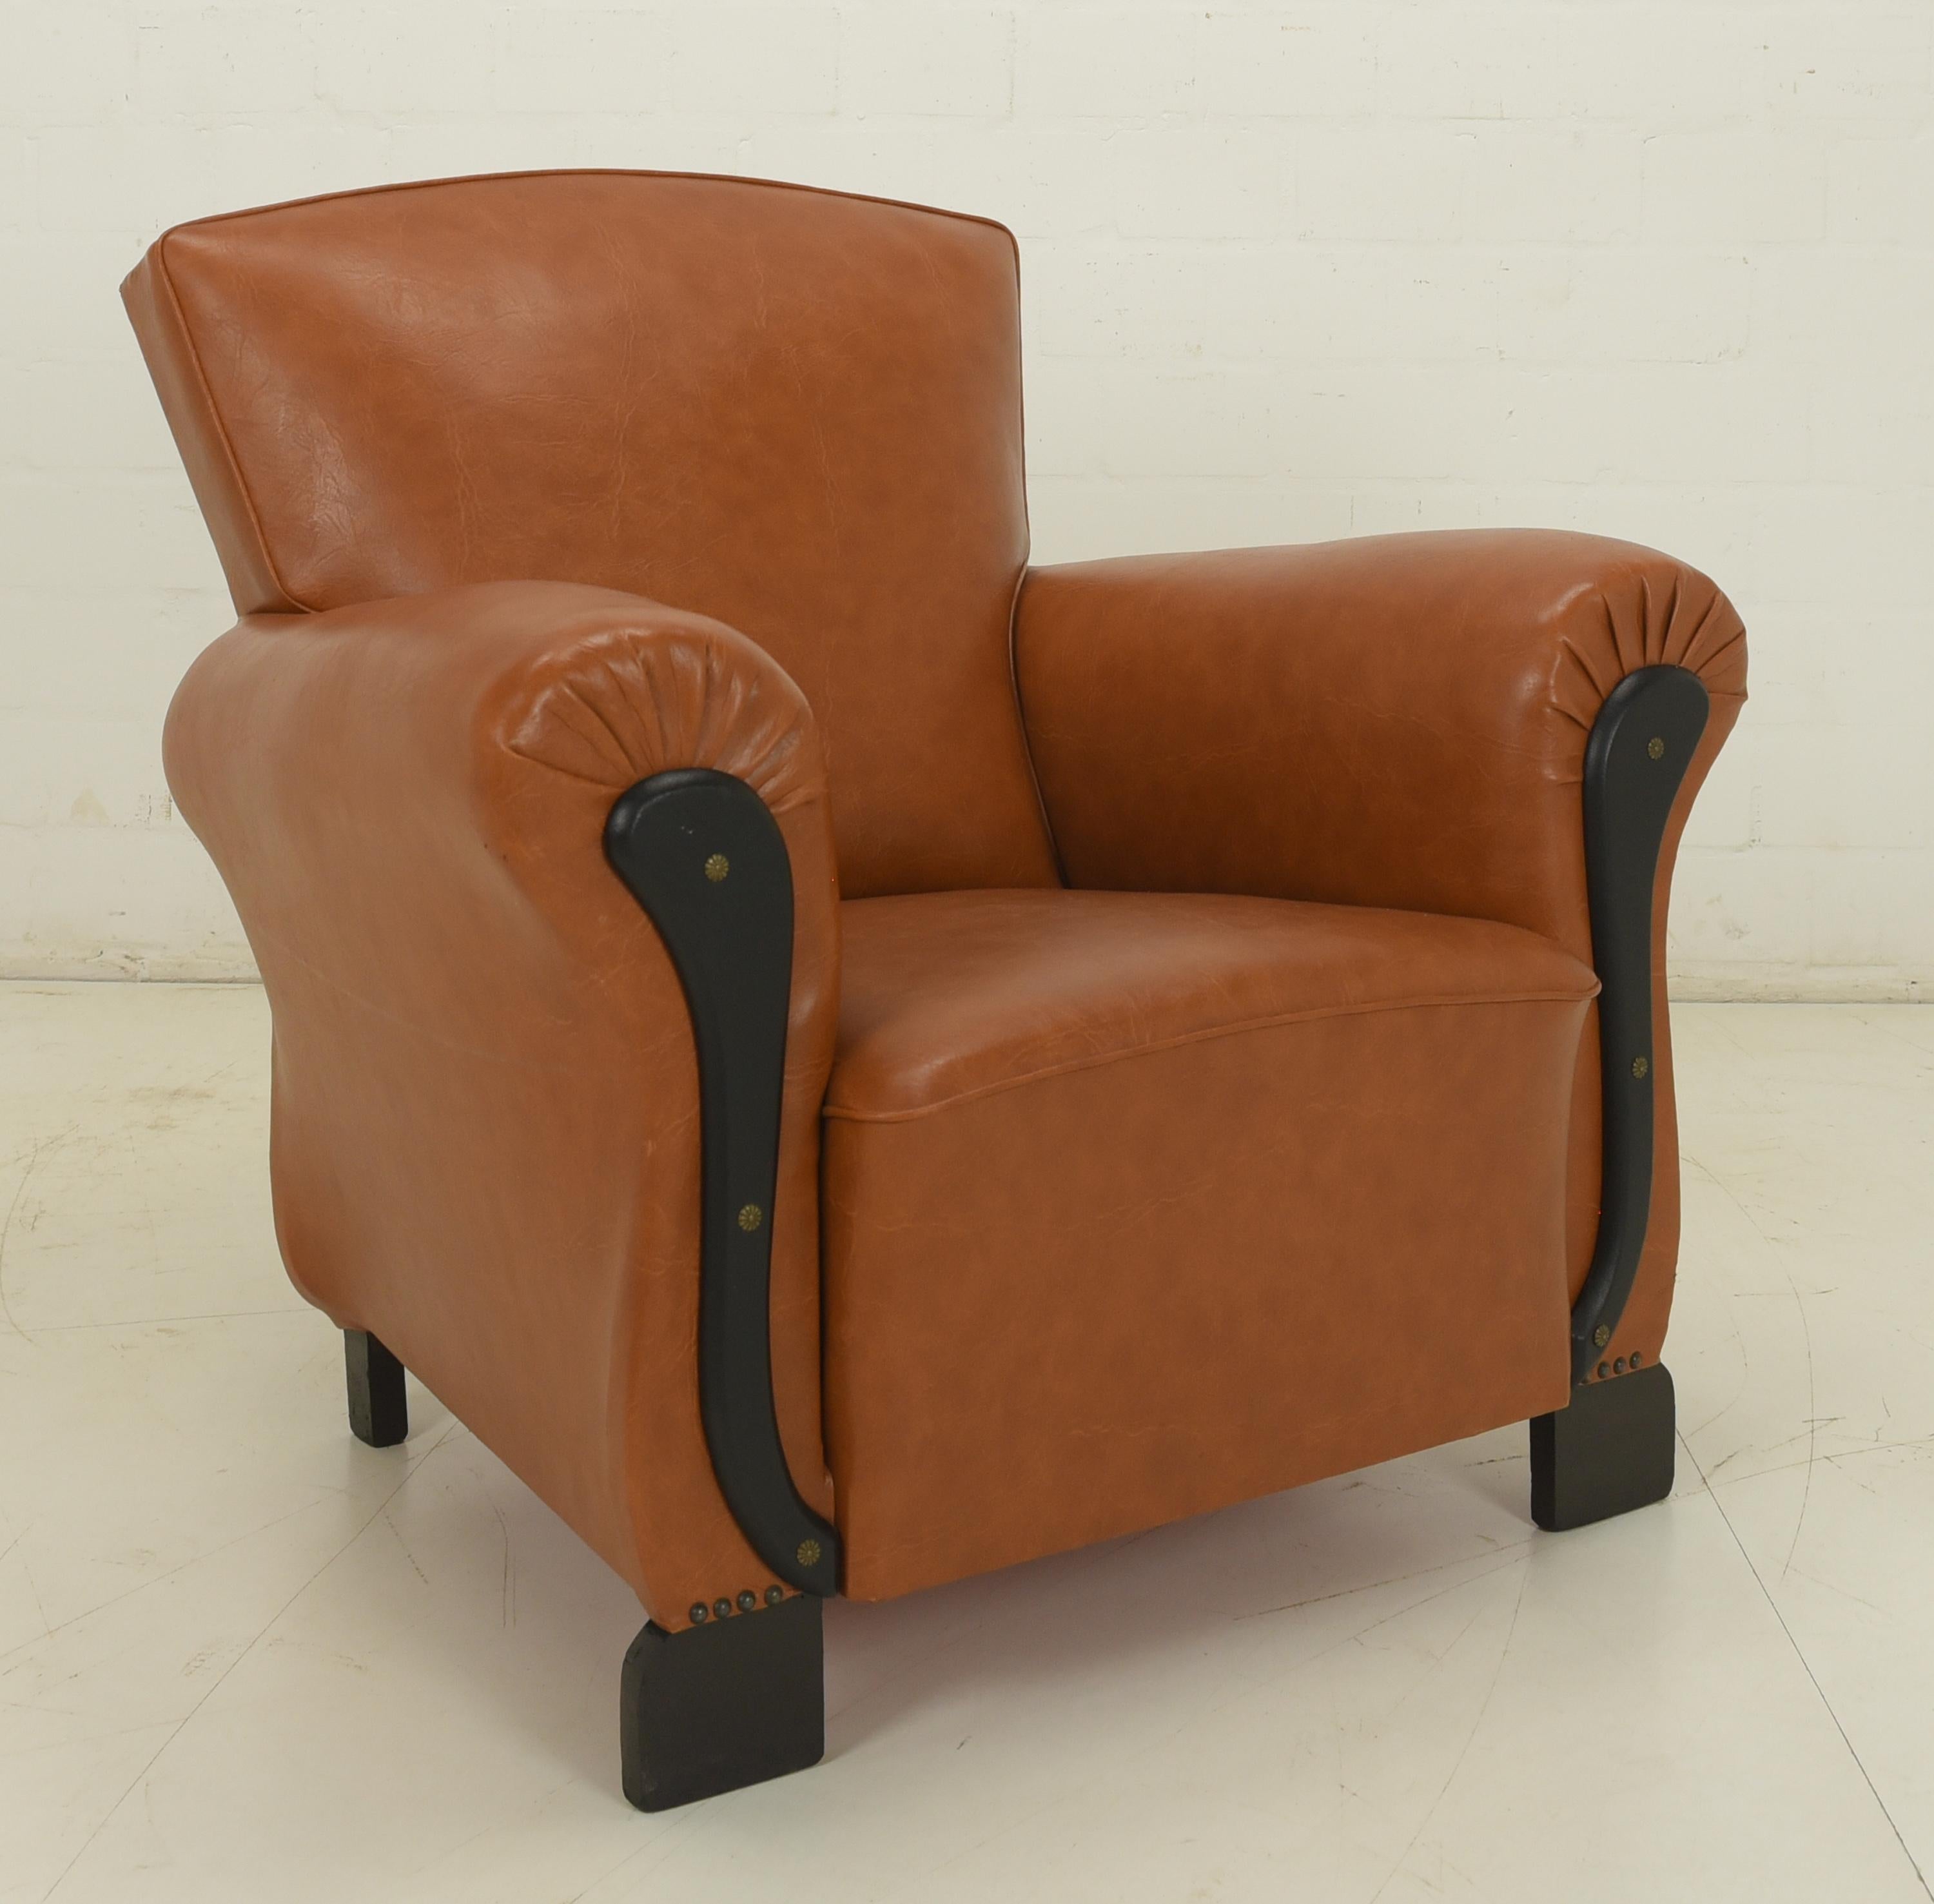 Pair of Art Deco Club Armchairs / Lounge Chairs in Leather, 1940 For Sale 2